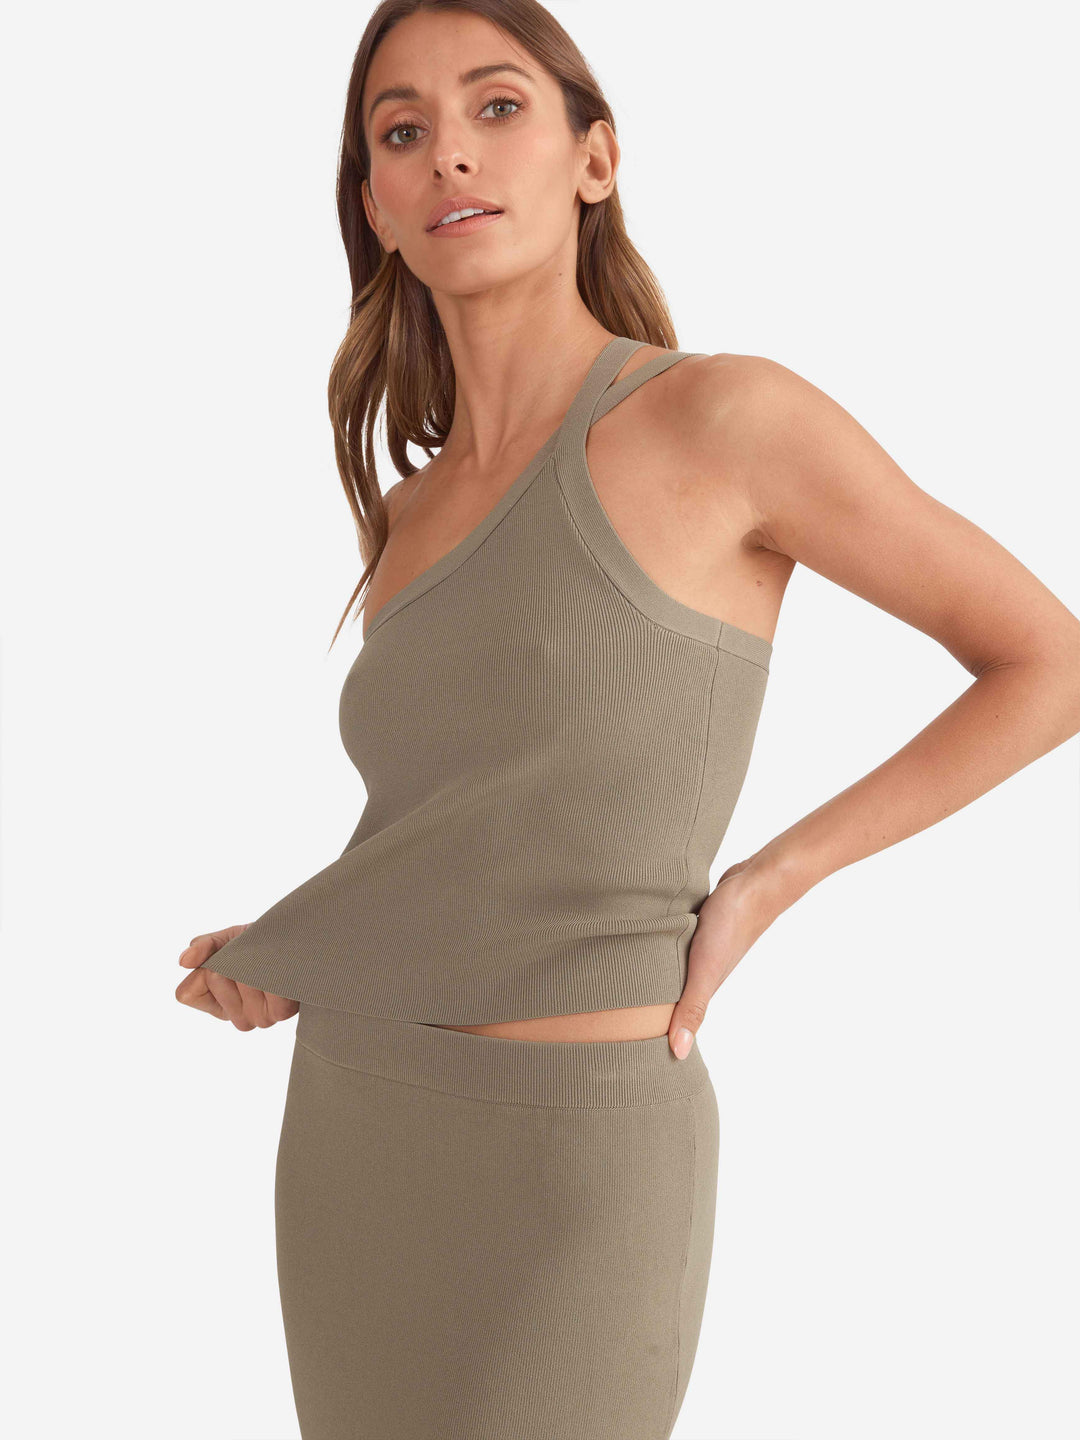 Ena Pelly Evie Luxe Assymetric Knit Tank - Olive